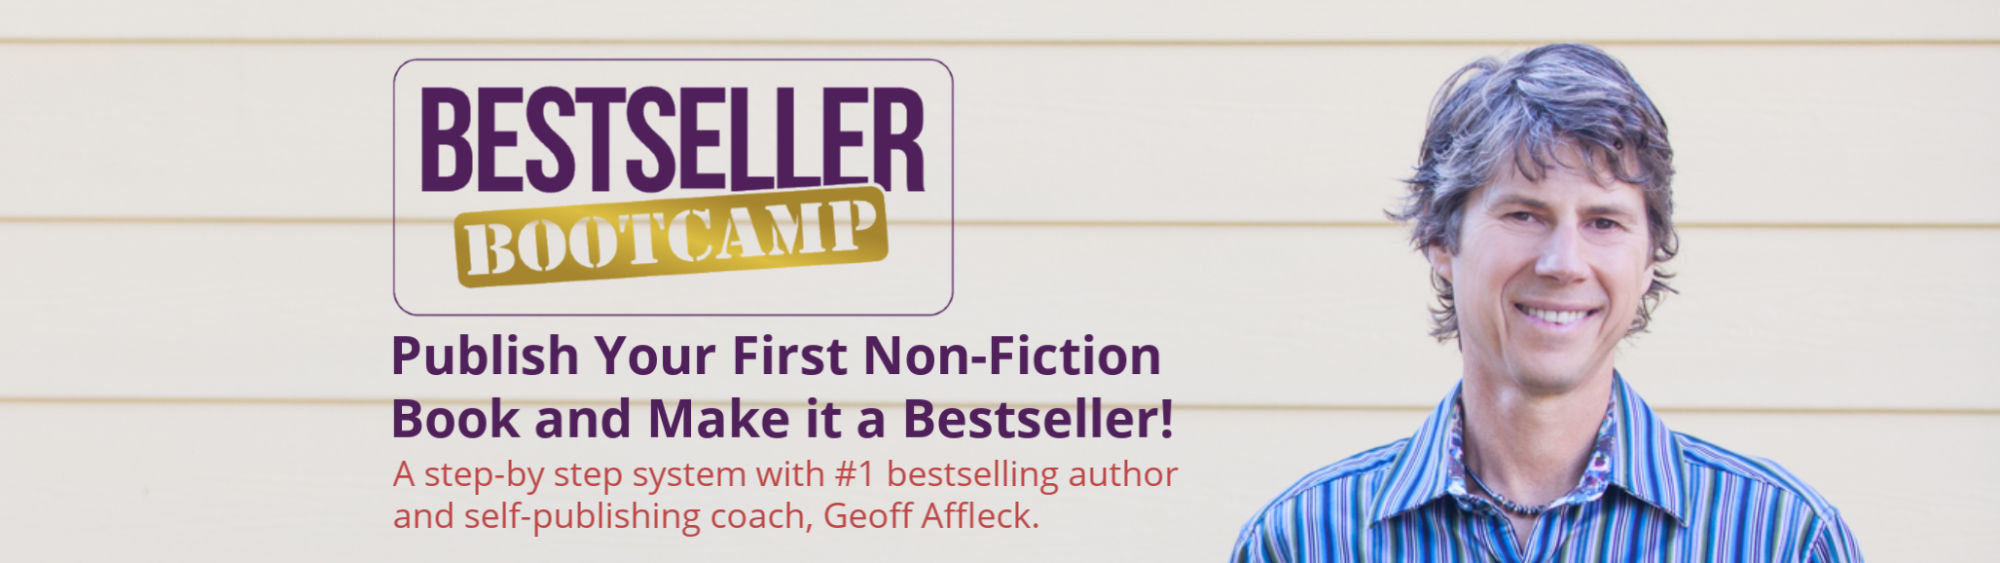 Bestseller Bootcamp with Geoff Affleck